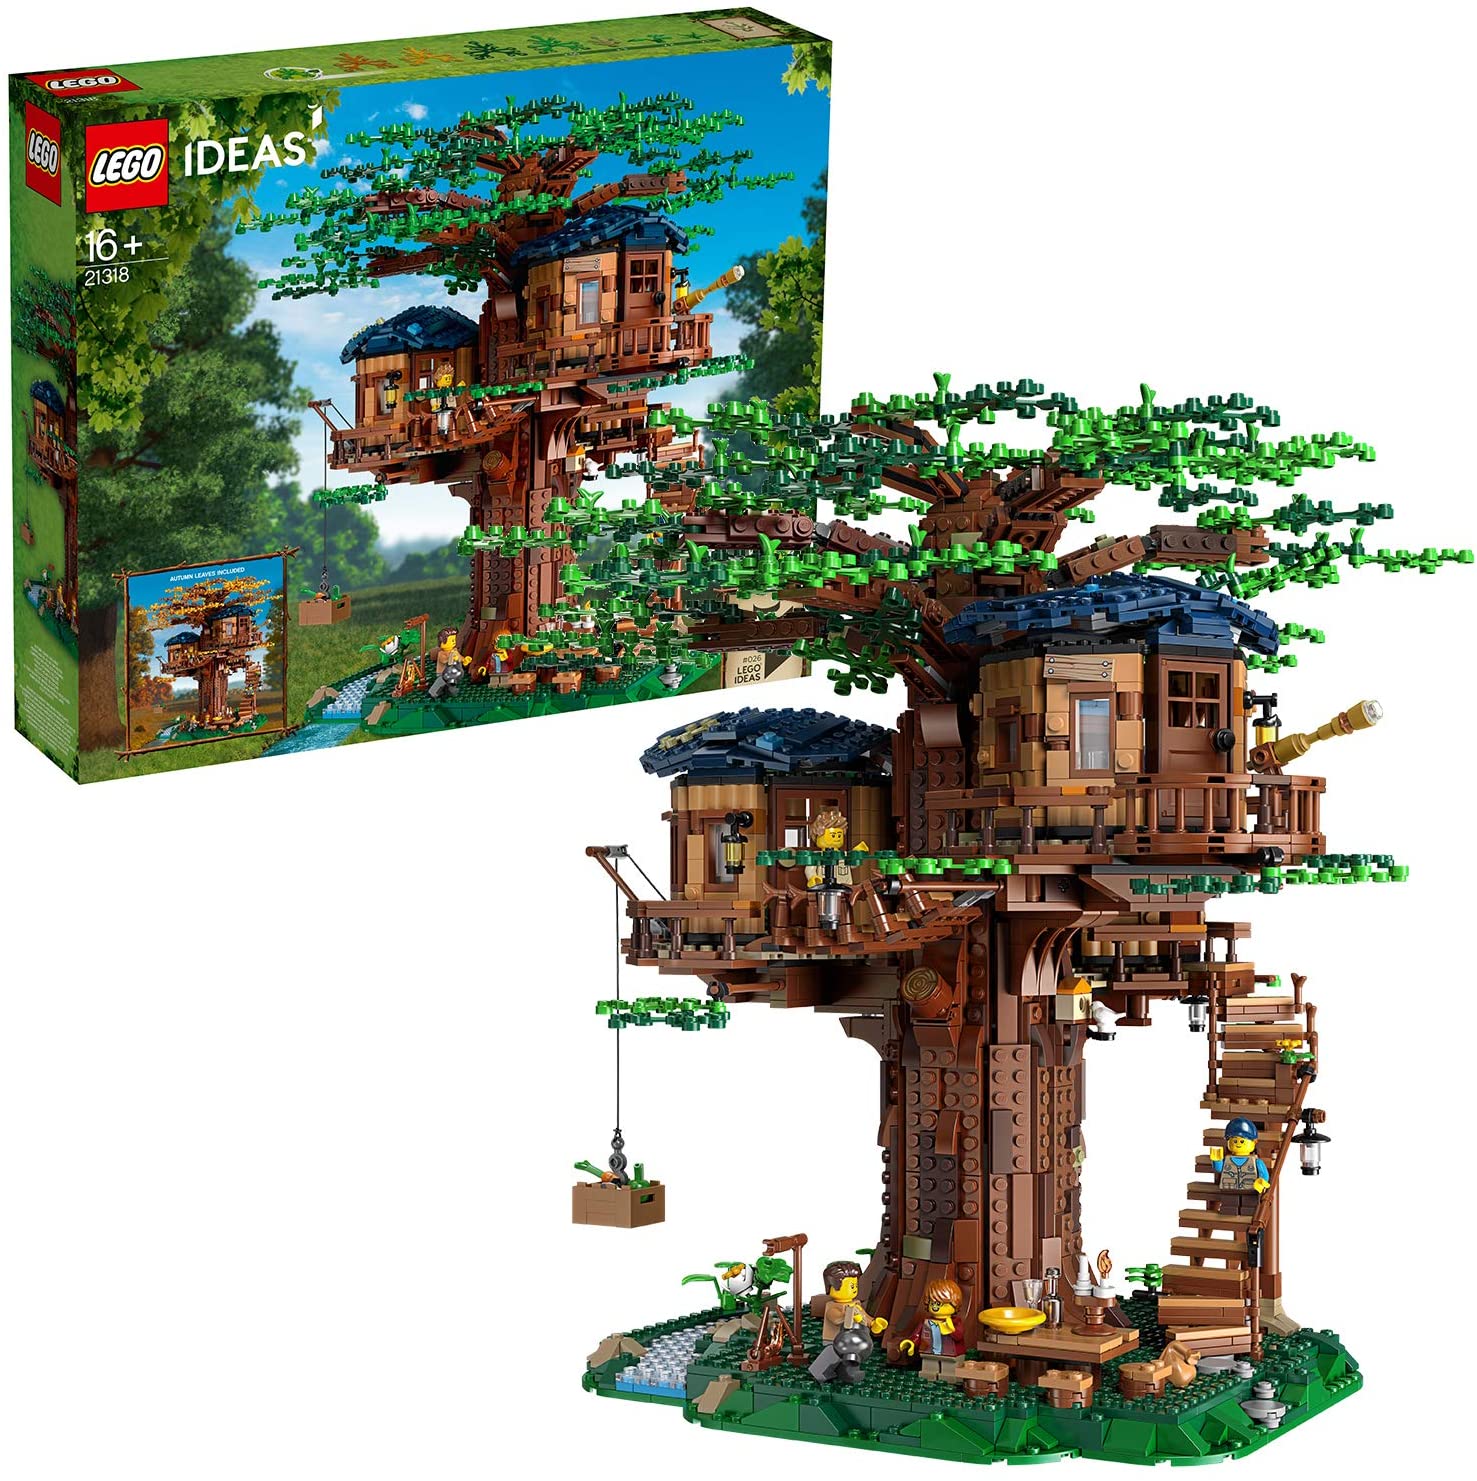 LEGO Ideas Tree House 21318 Build and Display (3036 Pieces) for $169.99